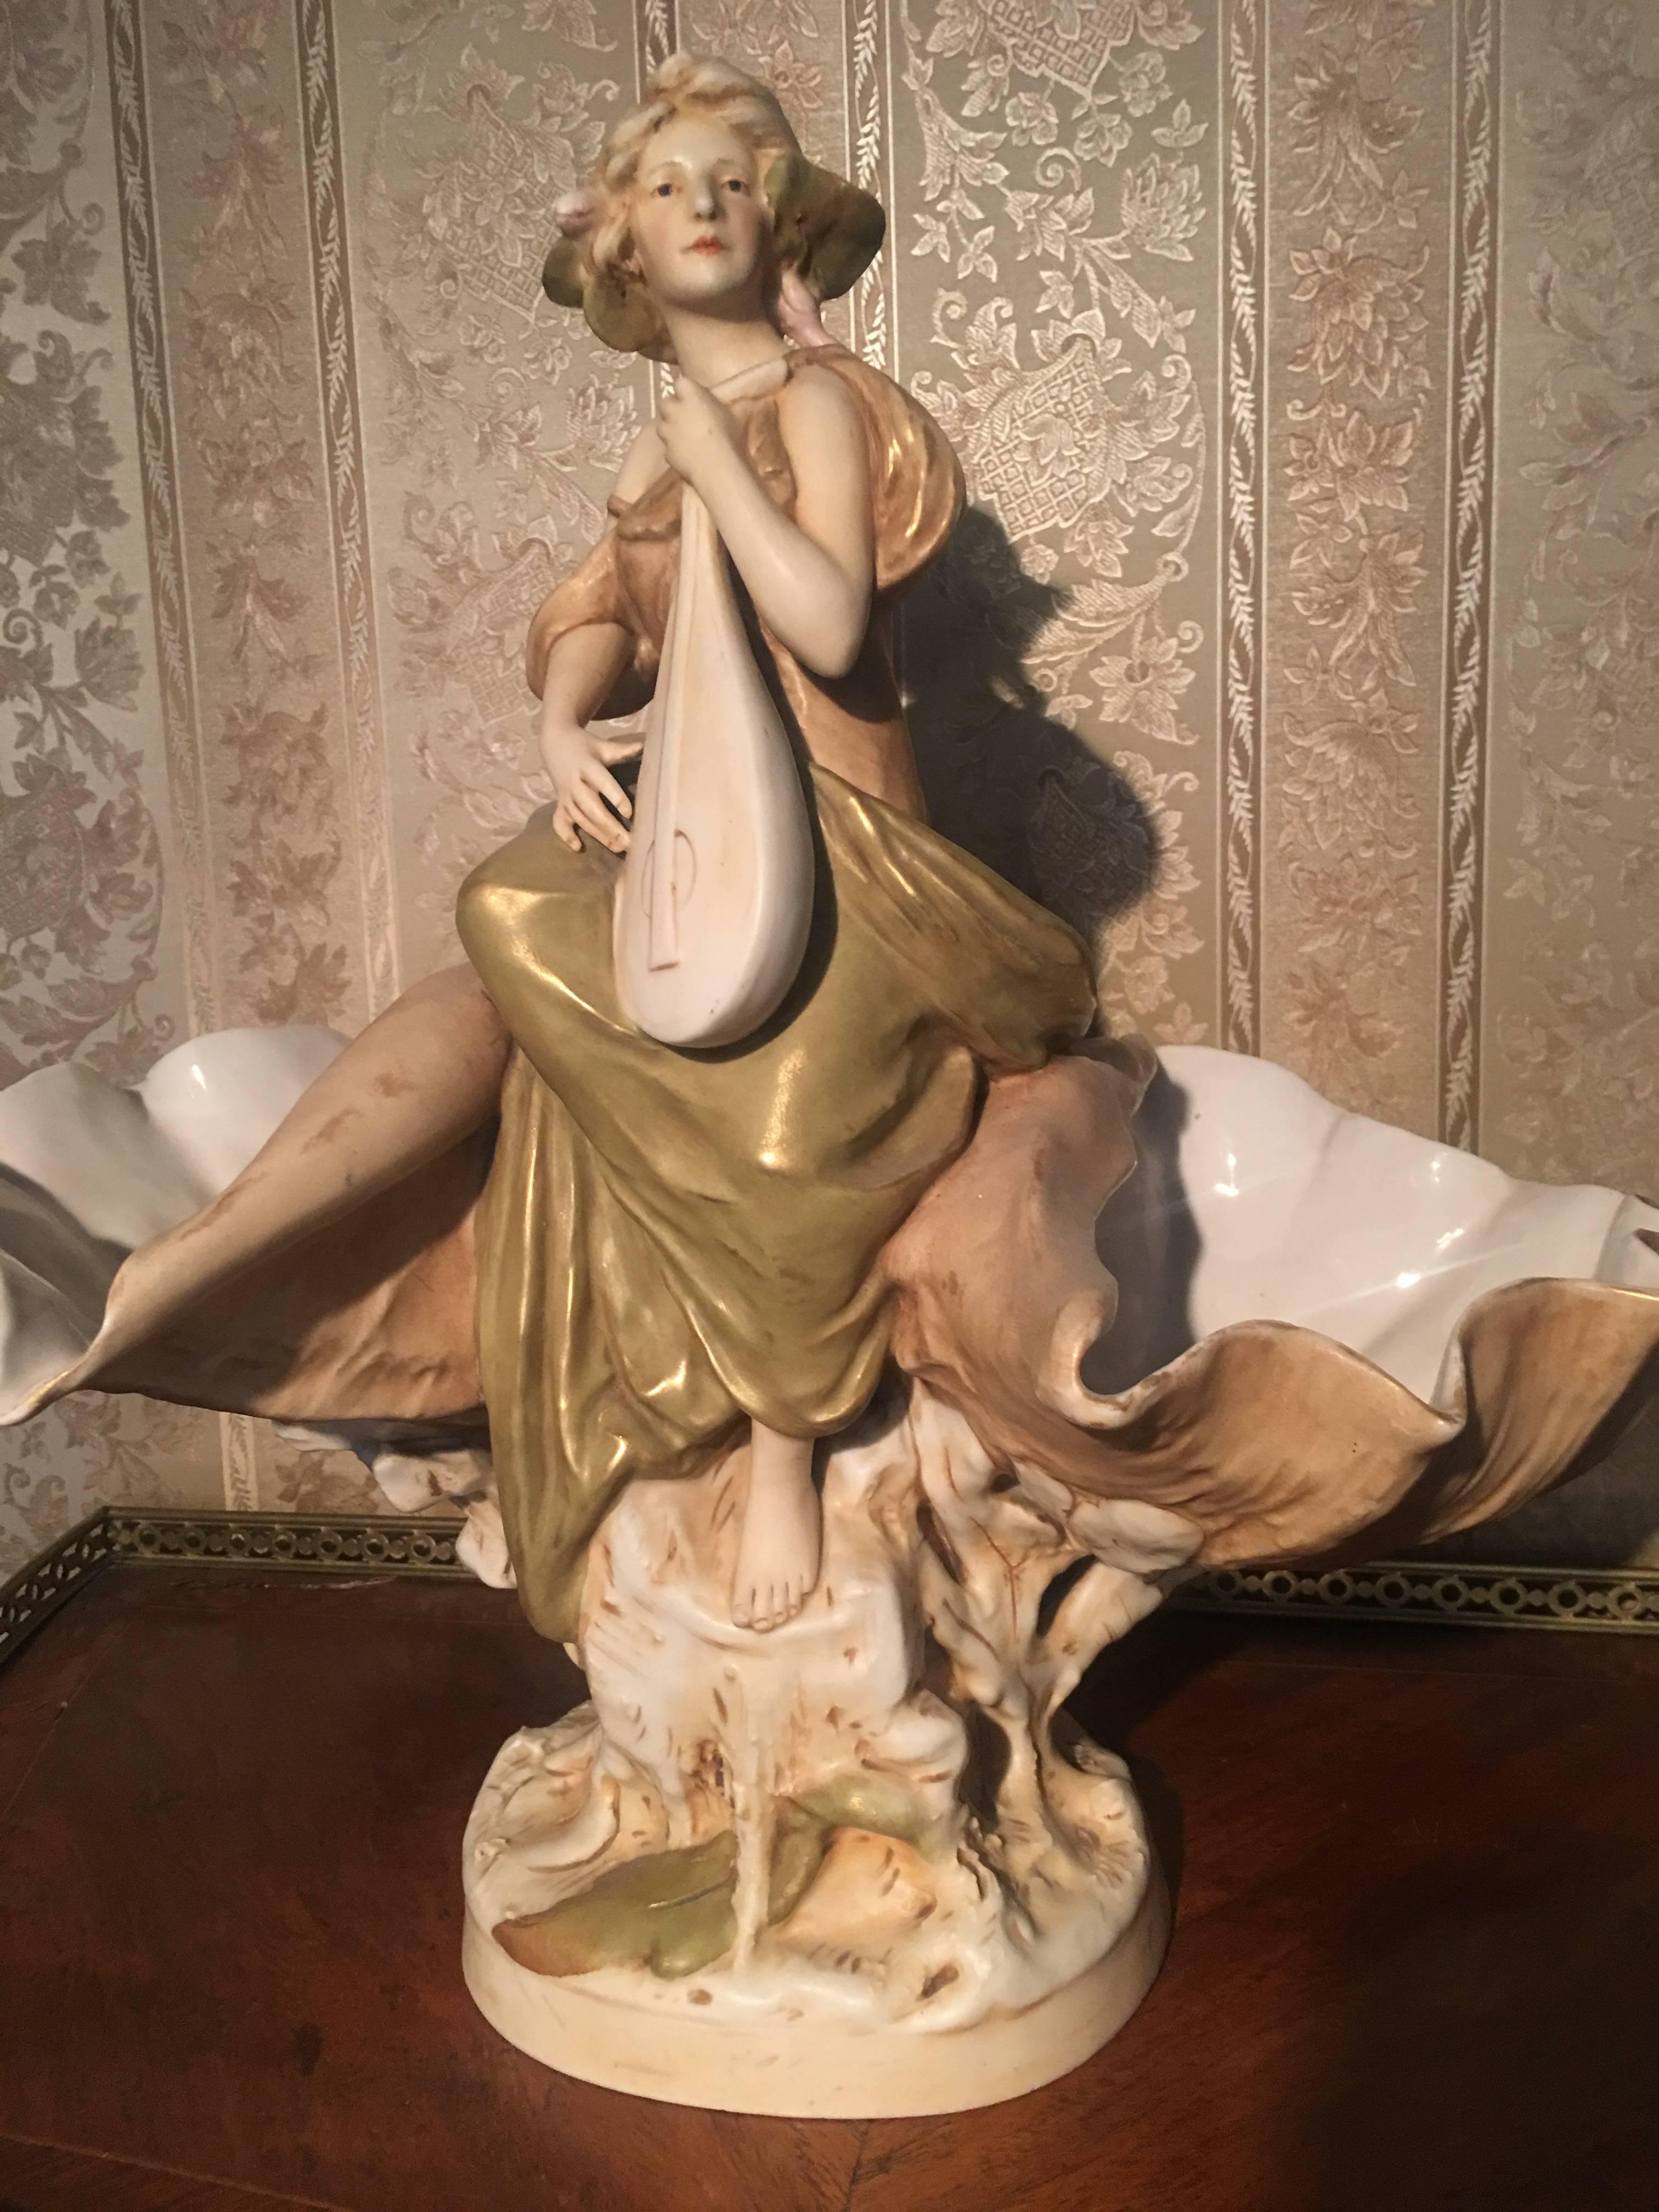 Beautiful large Art Nouveau porcelain figure Royal DUX

Royal Dux is a porcelain company based in the Czech Republic that manufactures figurines and ceramics in Neoclassical and Art Nouveau styles. Some of their most popular pieces include the